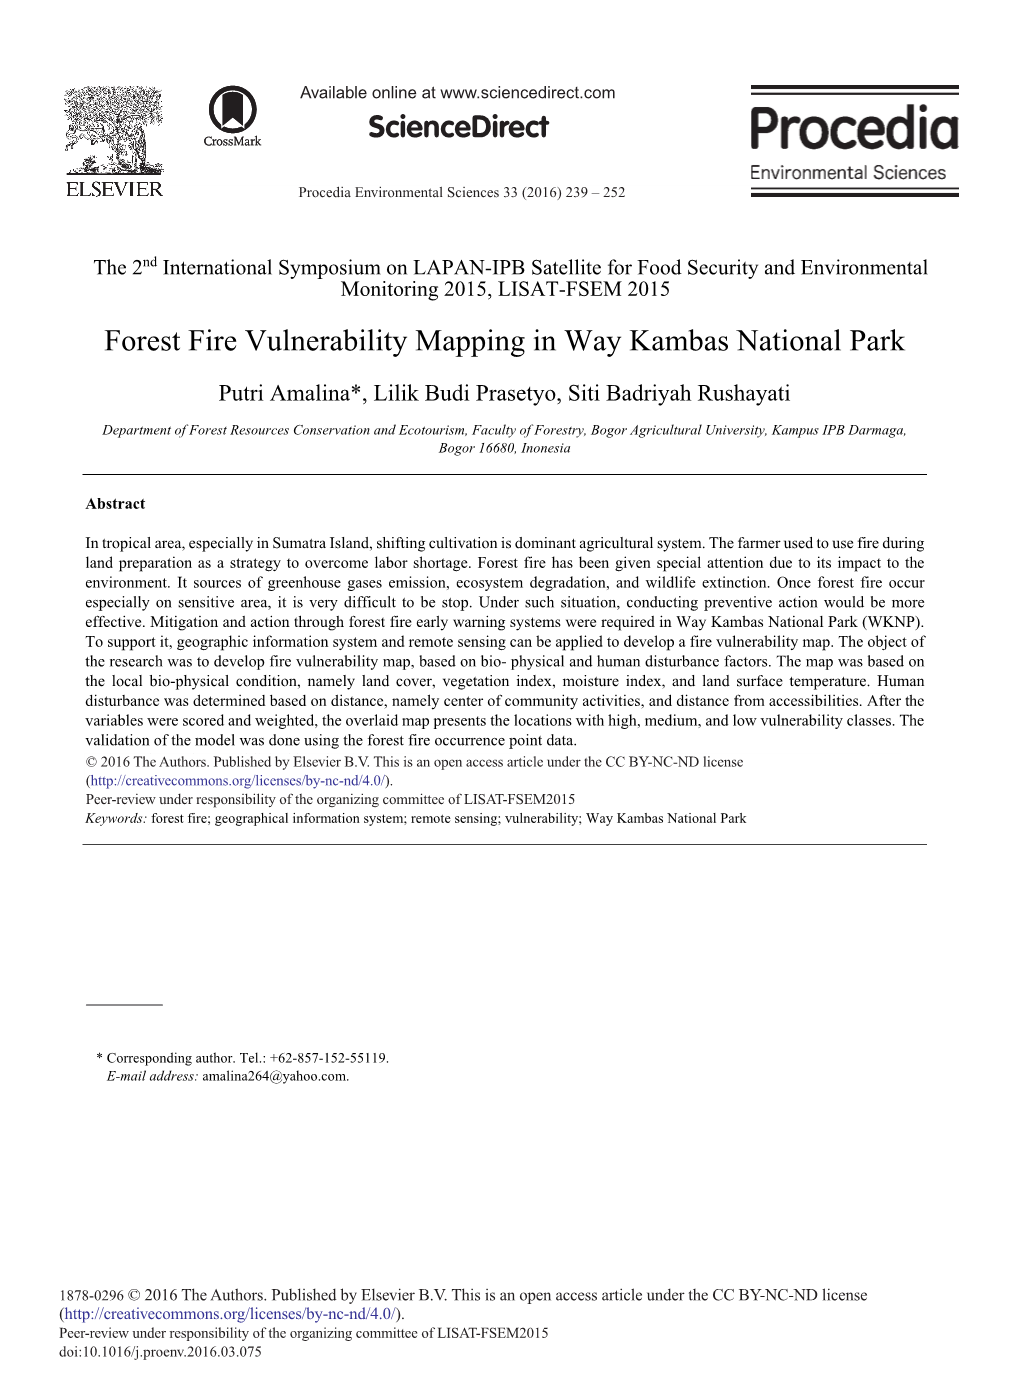 Forest Fire Vulnerability Mapping in Way Kambas National Park